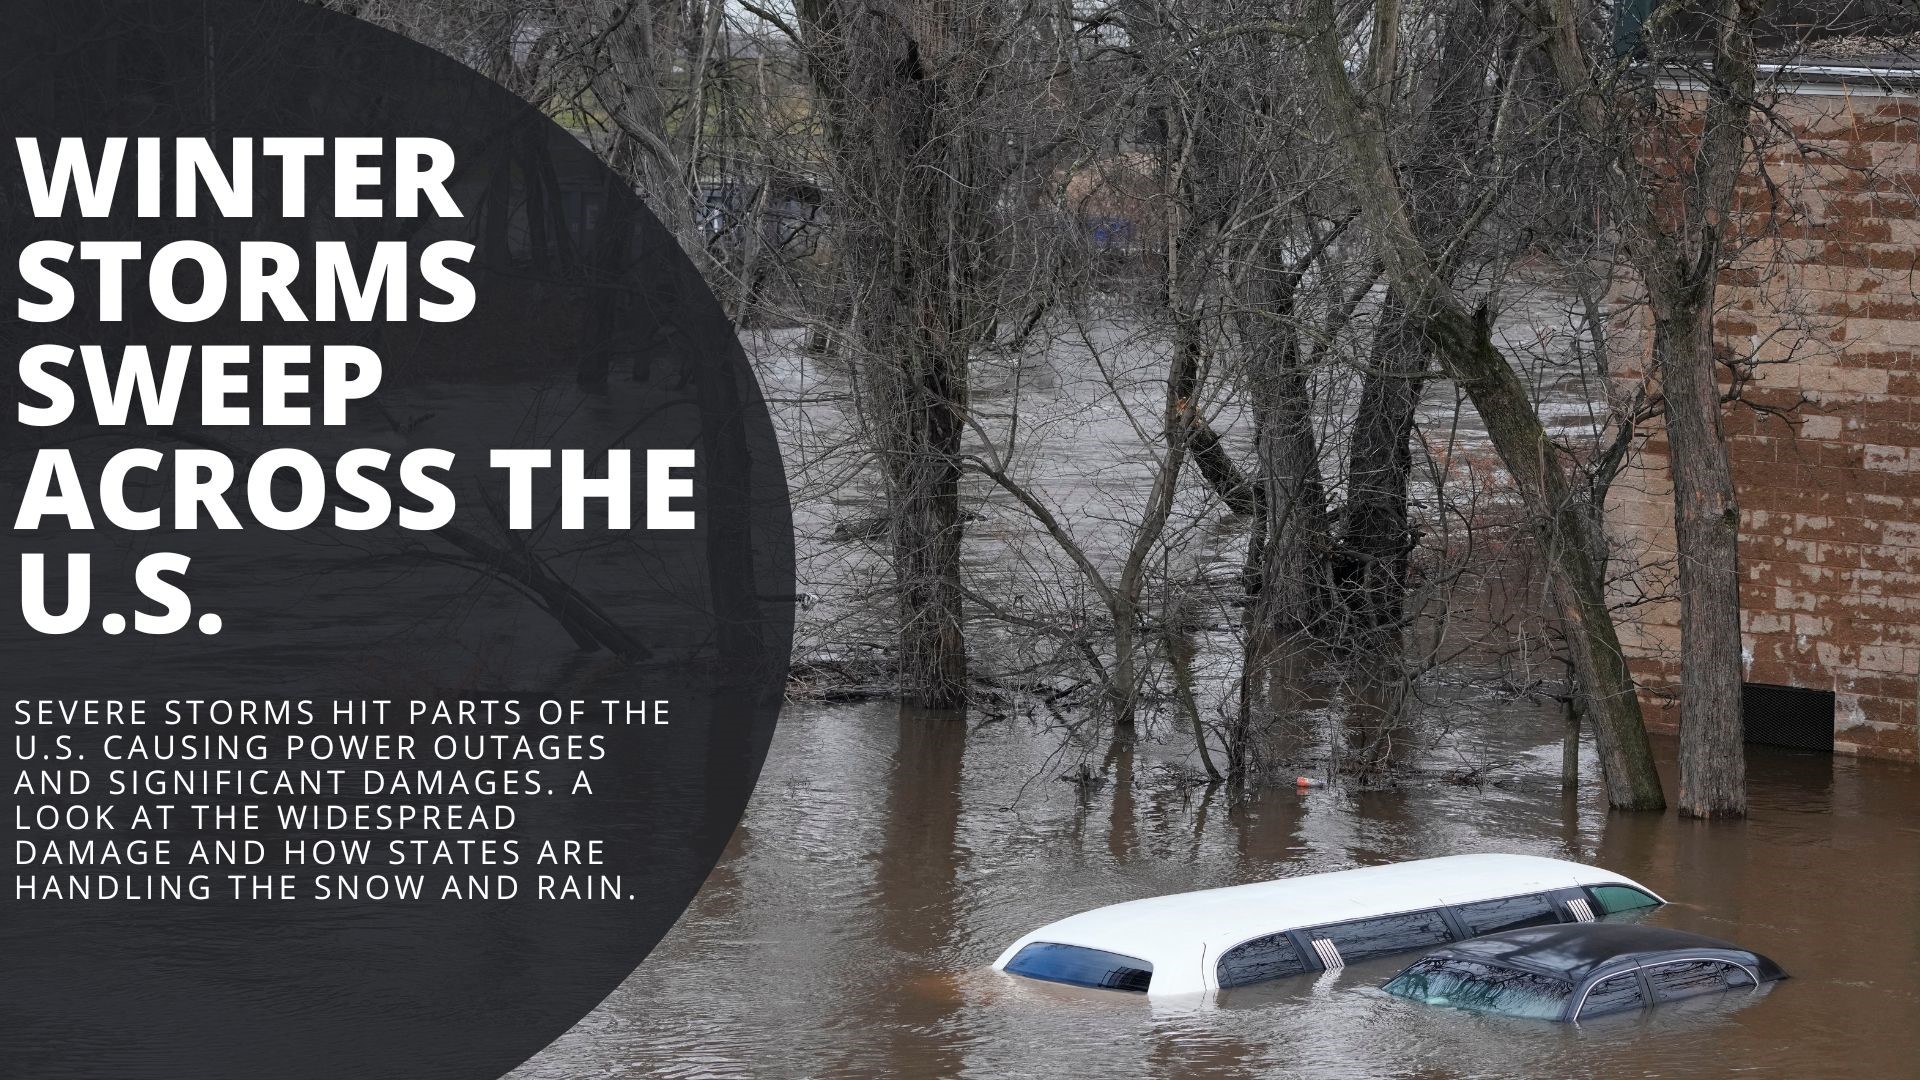 Severe storms hit parts of the U.S. causing power outages and significant damages. A look at the widespread damage and how states are handling the snow and rain.